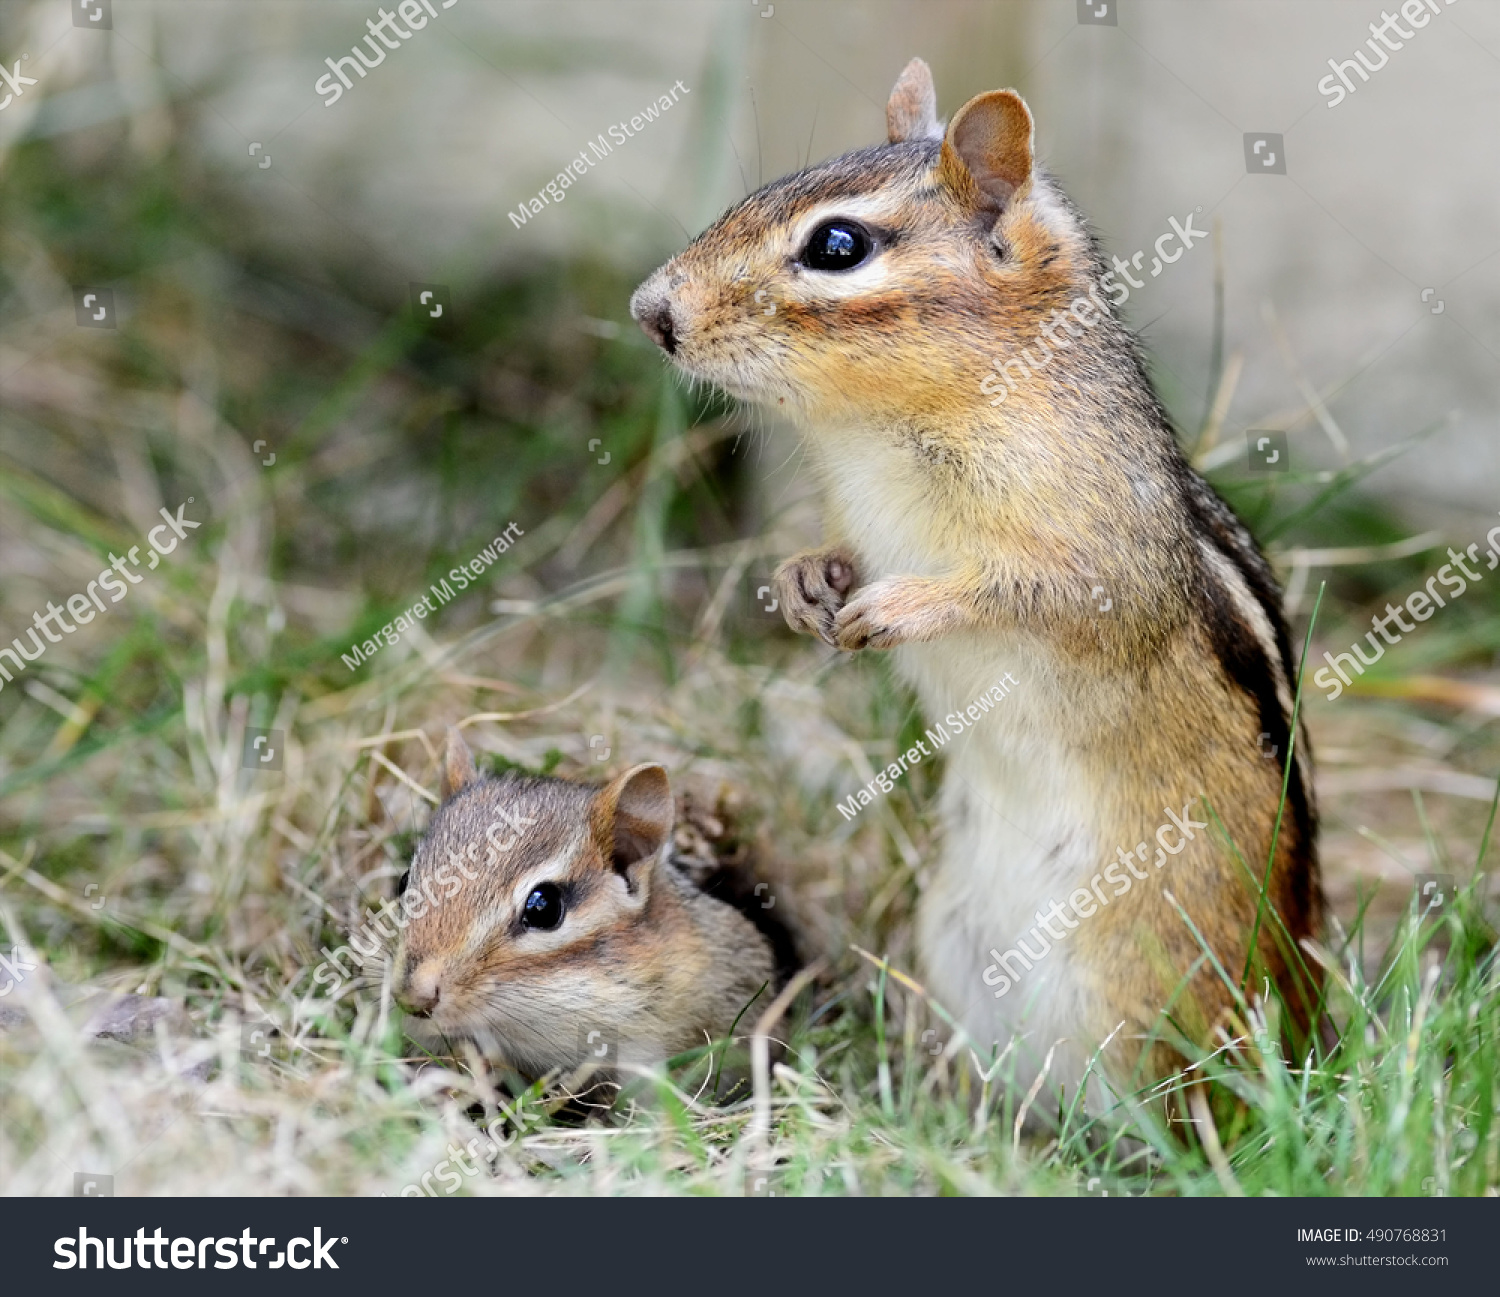 Closeup Mother Chipmunk Her Adorable Baby Stock Photo (100% Legal ...